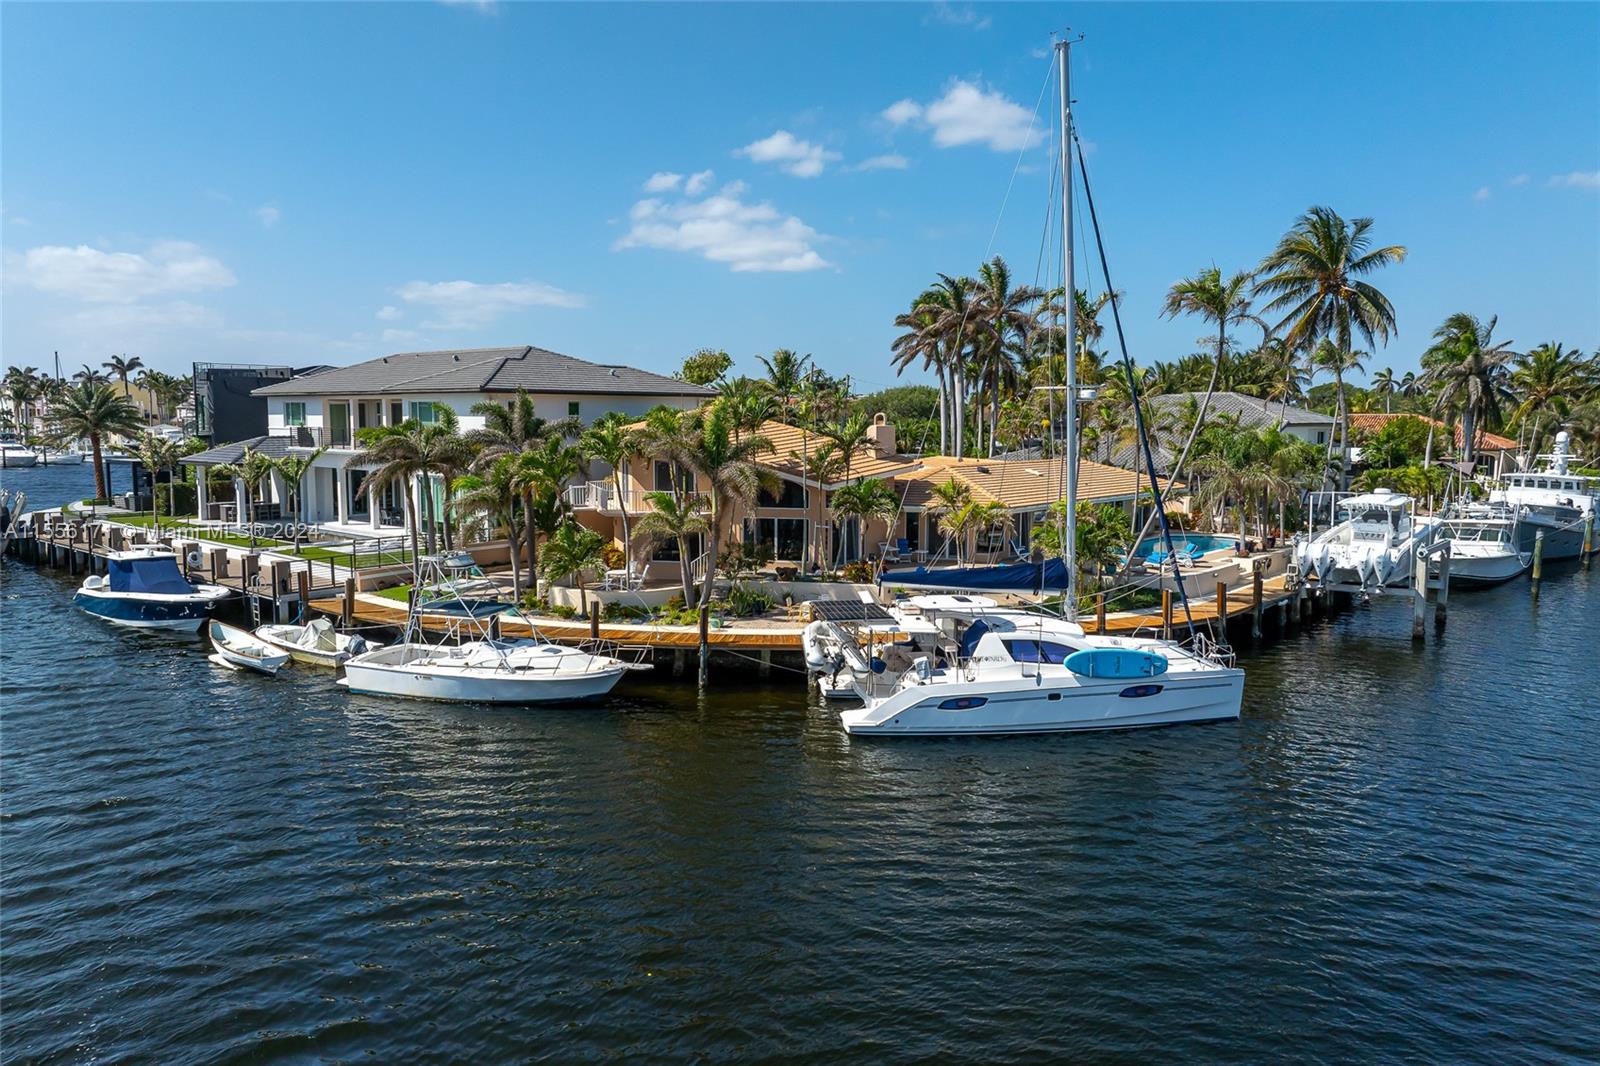 This inimitable east-facing waterfront property located in the picturesque community of Lighthouse Point offers unparalleled water frontage and access to Hillsboro Inlet and Marina. Delivering a private paradise for boaters and a haven for beach-goers, there are endless opportunities to explore the idyllic marine landscape in this vibrant South Florida community. This home offers 180+/- ft. of water-frontage, sits on a spacious and intimately scenic premier lot and is an entertainer’s dream. Nestled directly along the water on Lake Placid, the house is equipped with hurricane glass and a newly built roof. This prime intracoastal community boasts dozens of winding canals and water vistas. What’s more, the property itself showcases endless views of the serene water throughout the house.